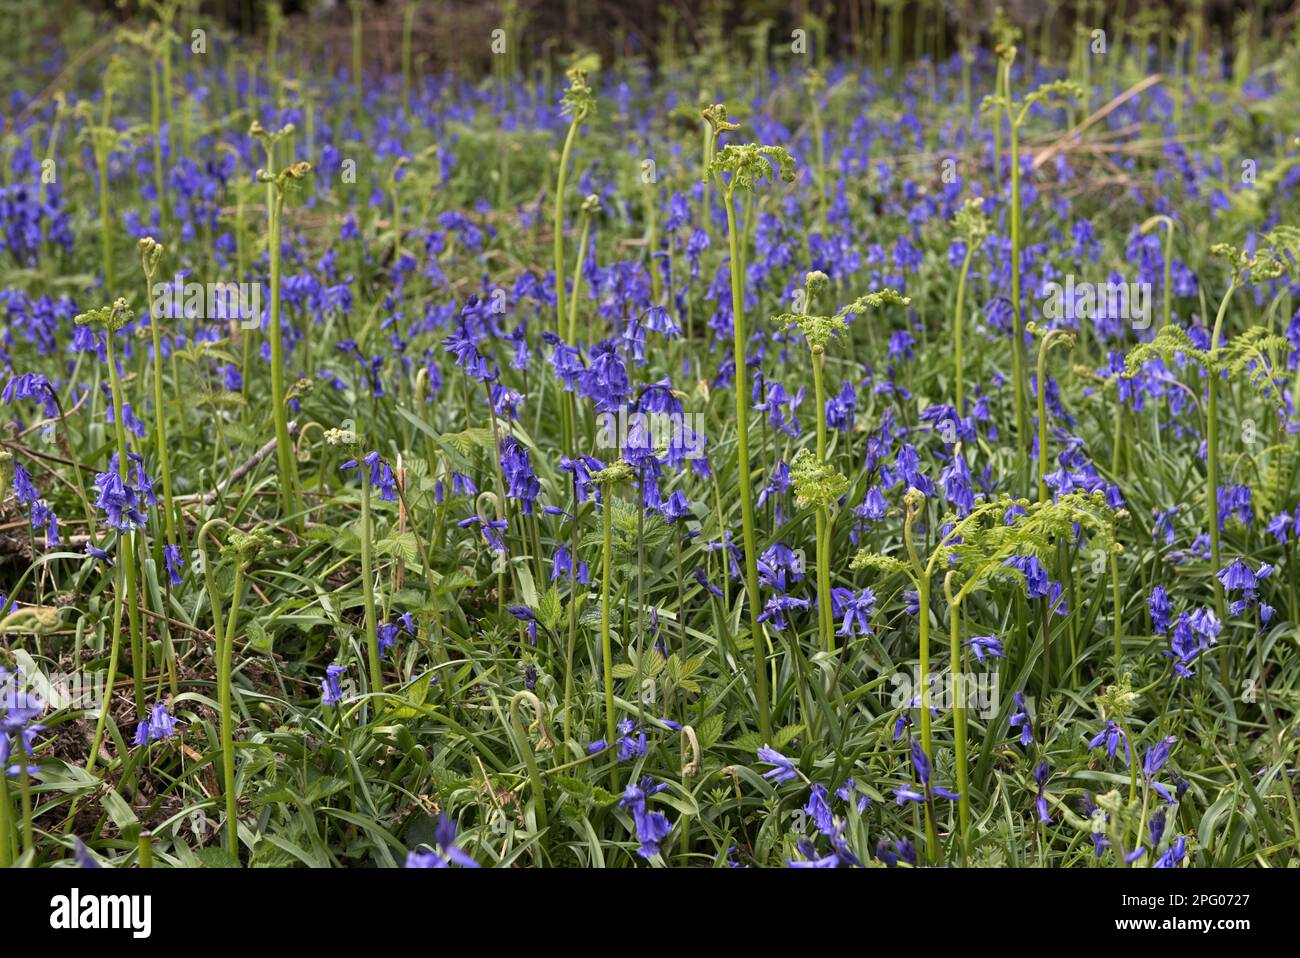 Flowering common bluebell (Hyacinthoides non-scripta) with shoots of young bracken (Pteridium aquilinum) in spring woodland, Berkshire, England Stock Photo